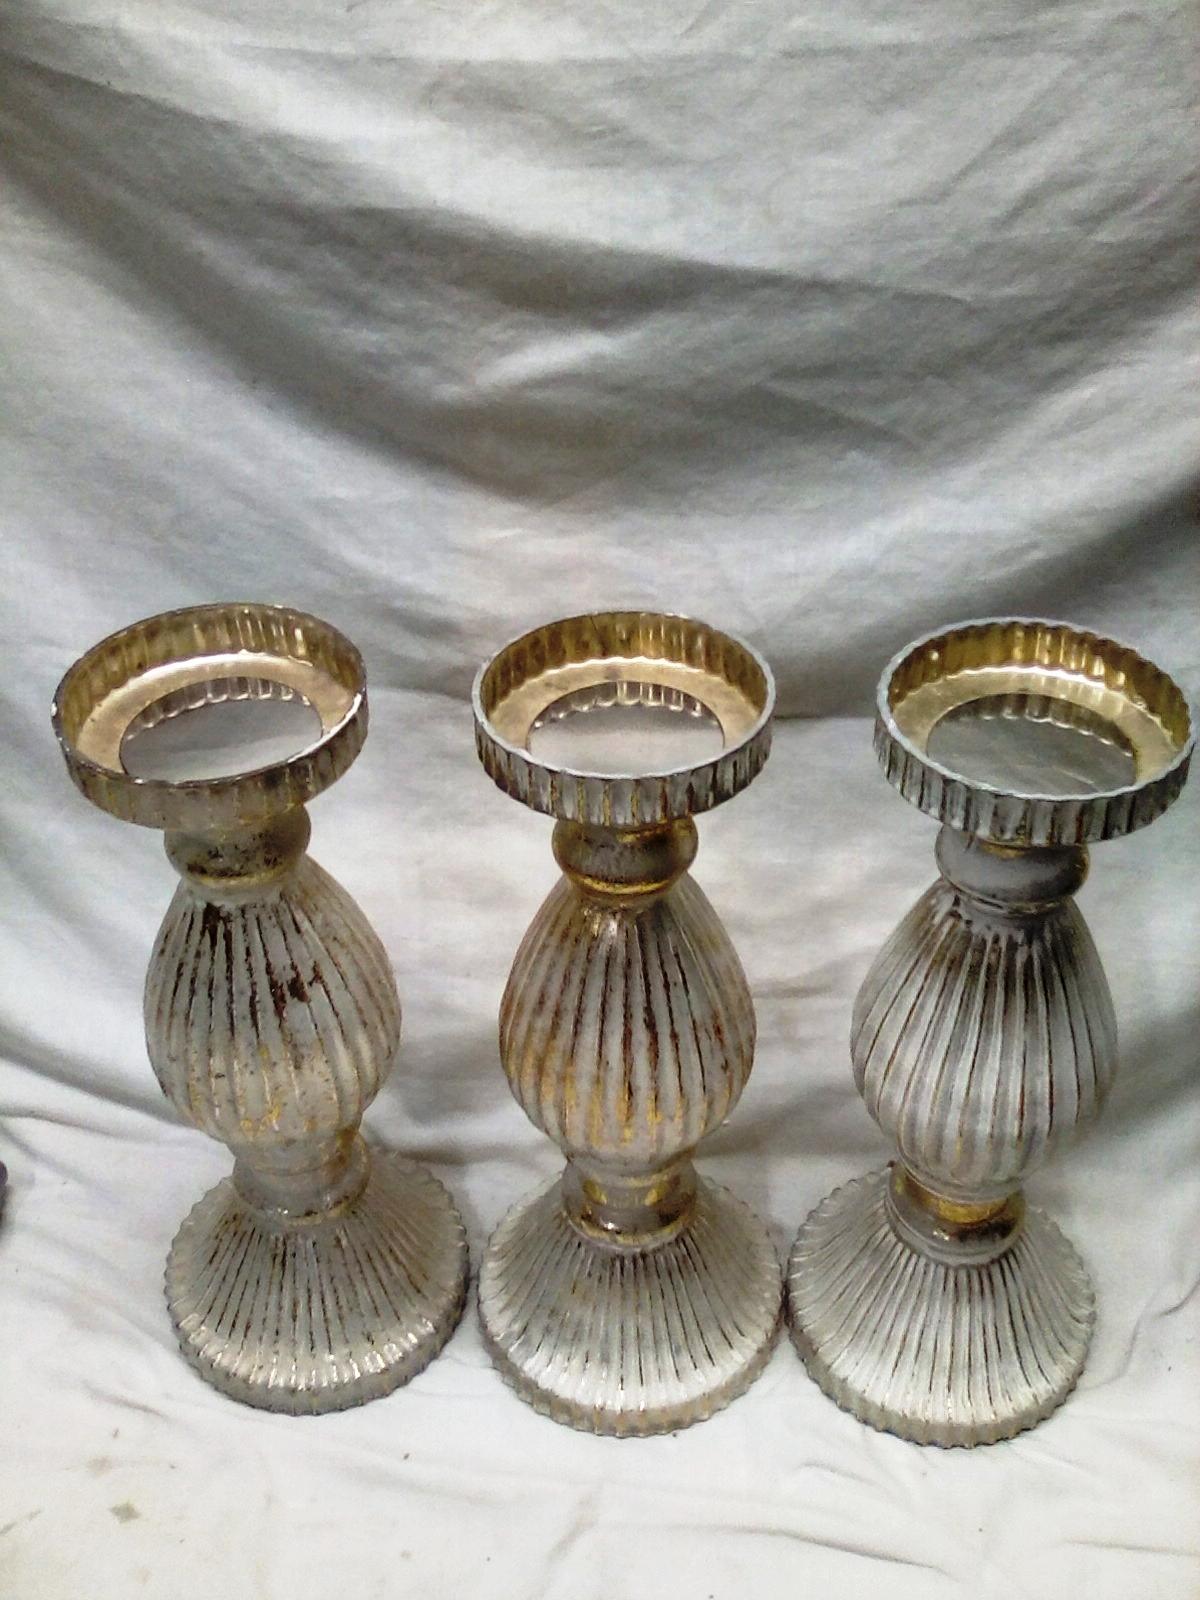 3 - 13"H X 4"DIAMETER CANDLE HOLDERS